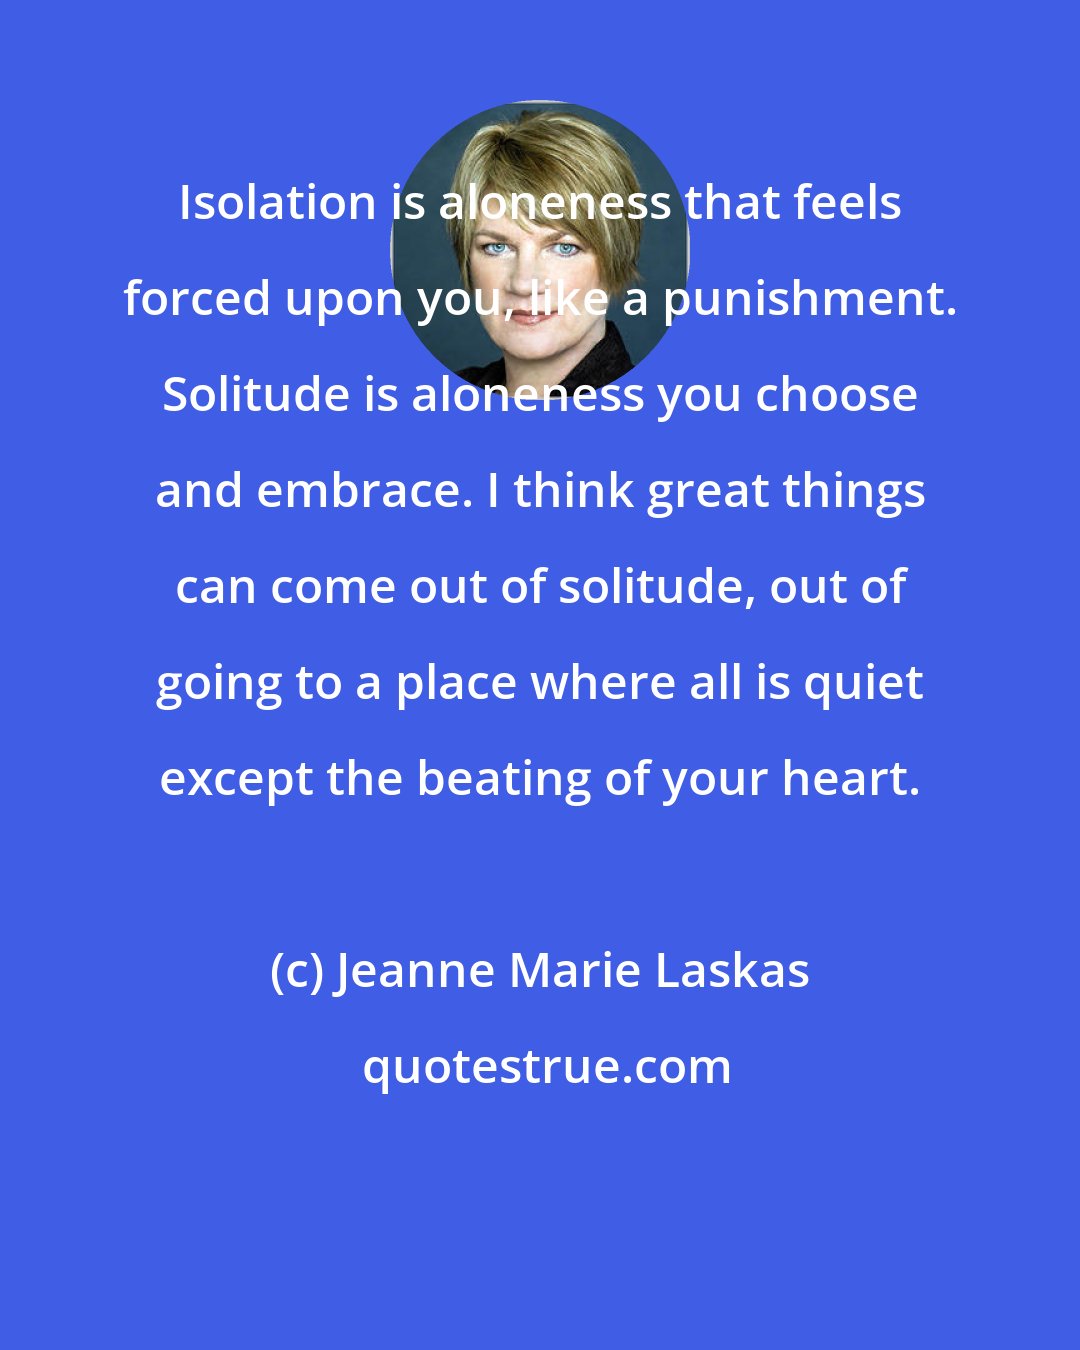 Jeanne Marie Laskas: Isolation is aloneness that feels forced upon you, like a punishment. Solitude is aloneness you choose and embrace. I think great things can come out of solitude, out of going to a place where all is quiet except the beating of your heart.